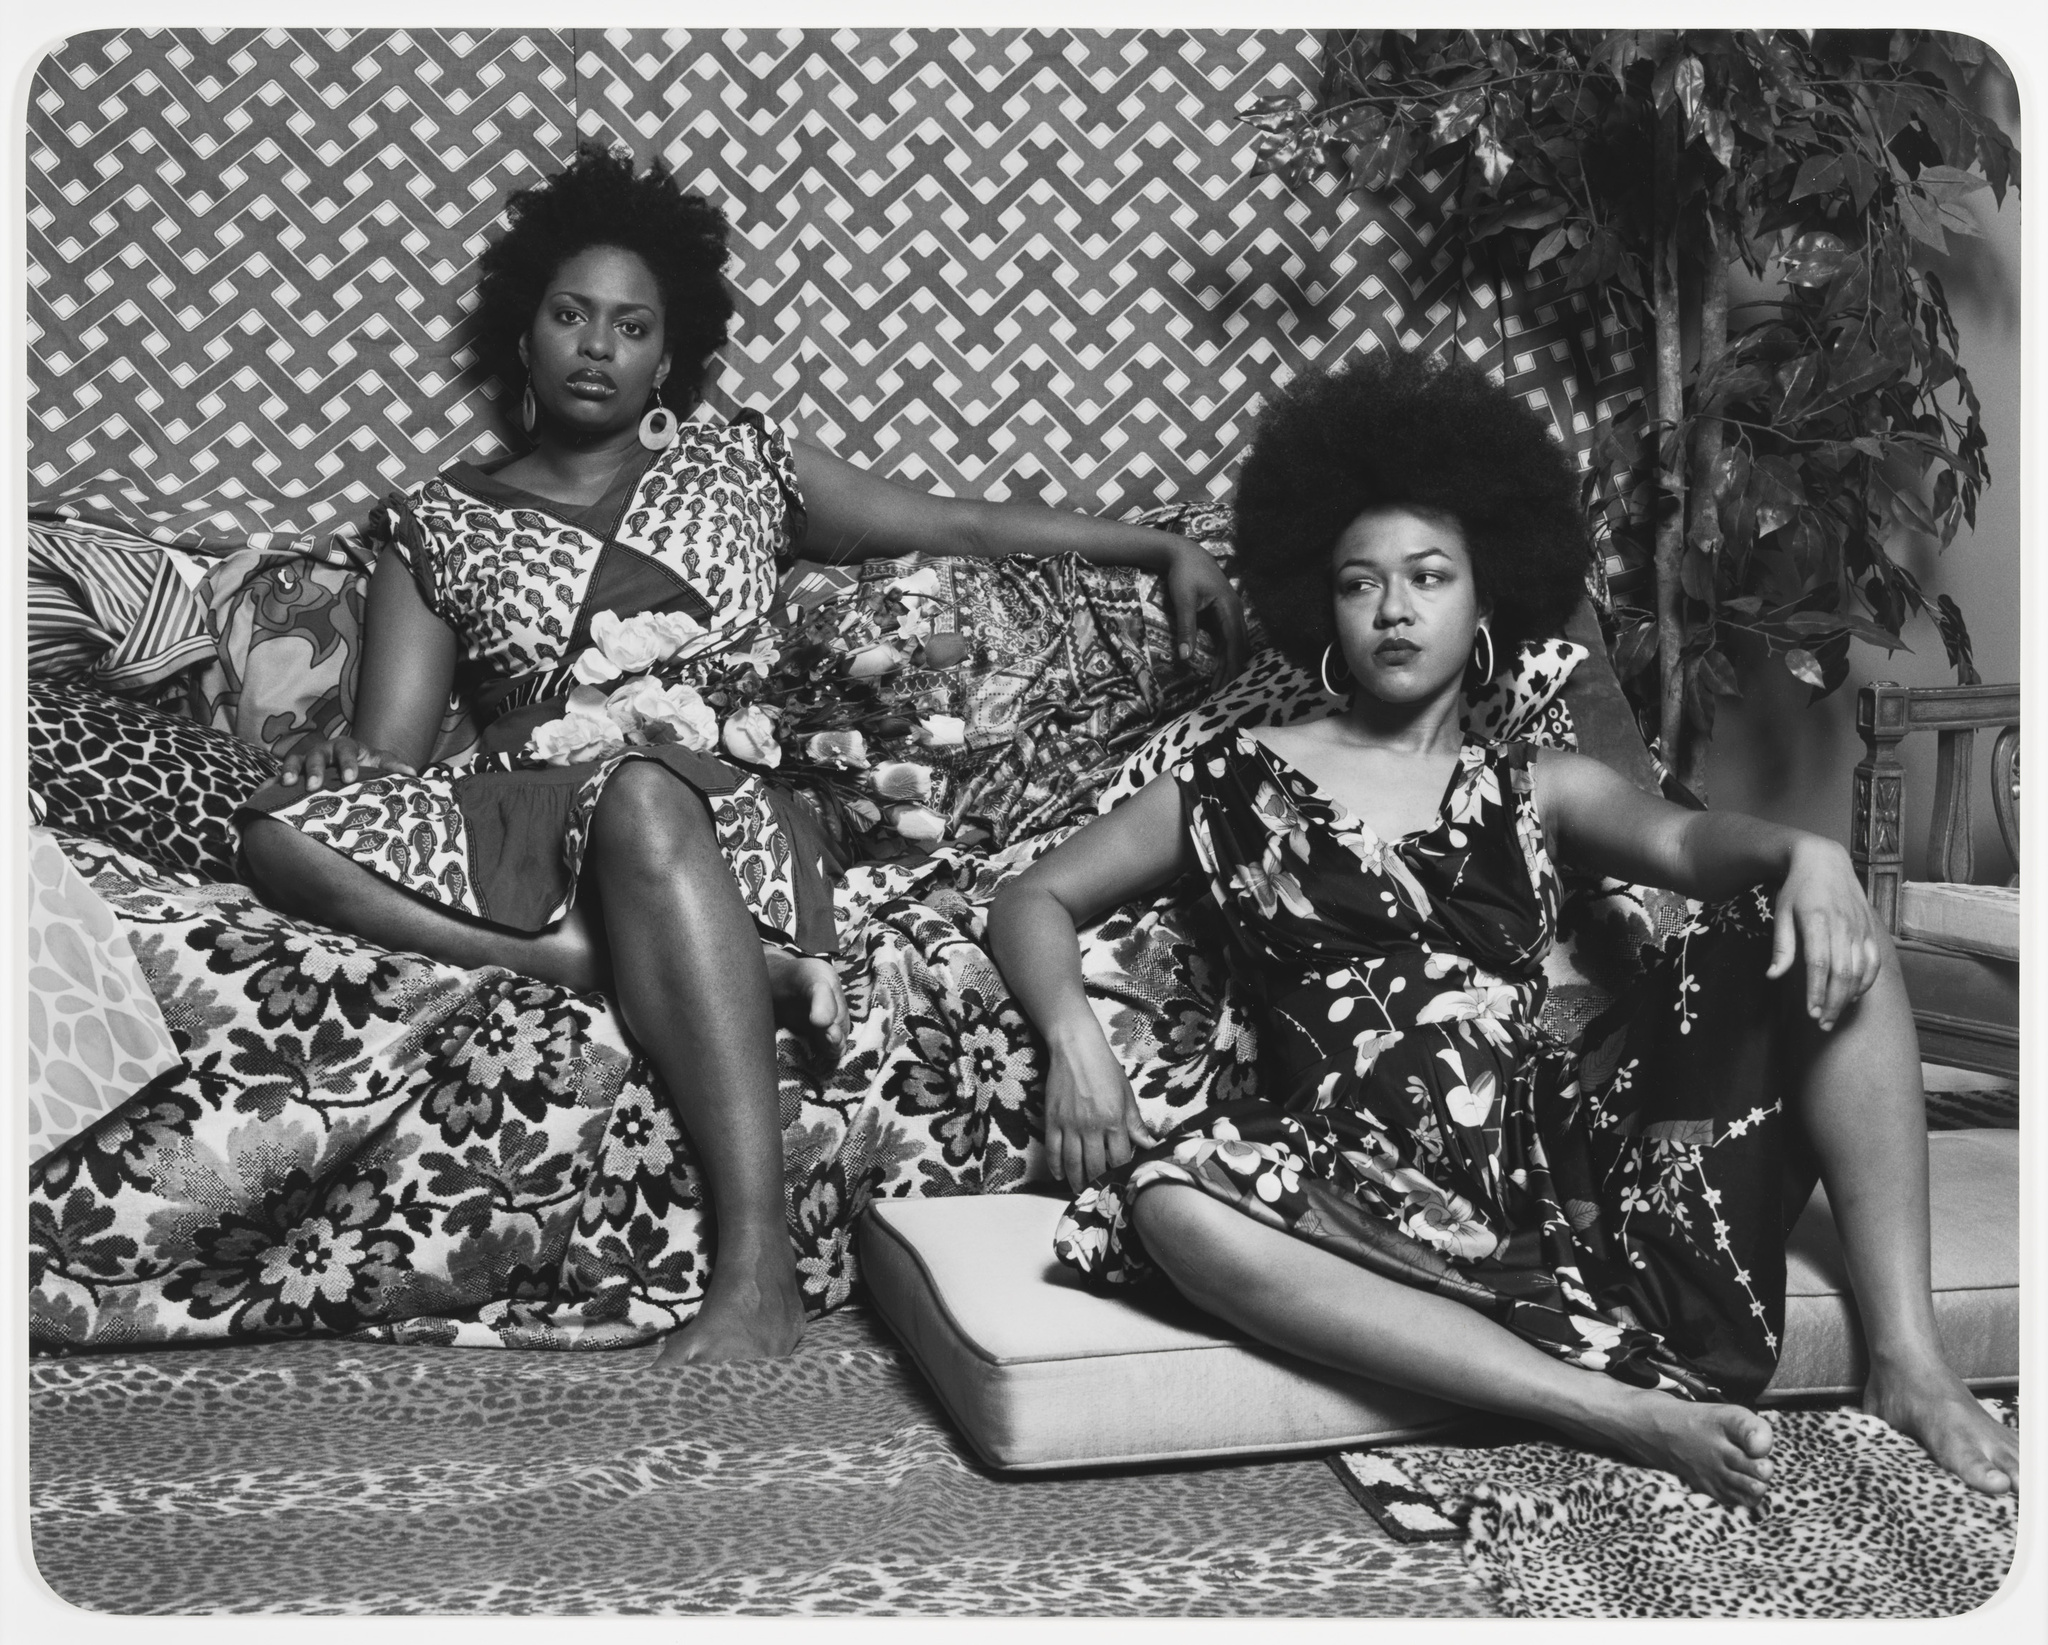 Two Black women wearing vibrantly patterned dresses sit in a similarly patterned interior.